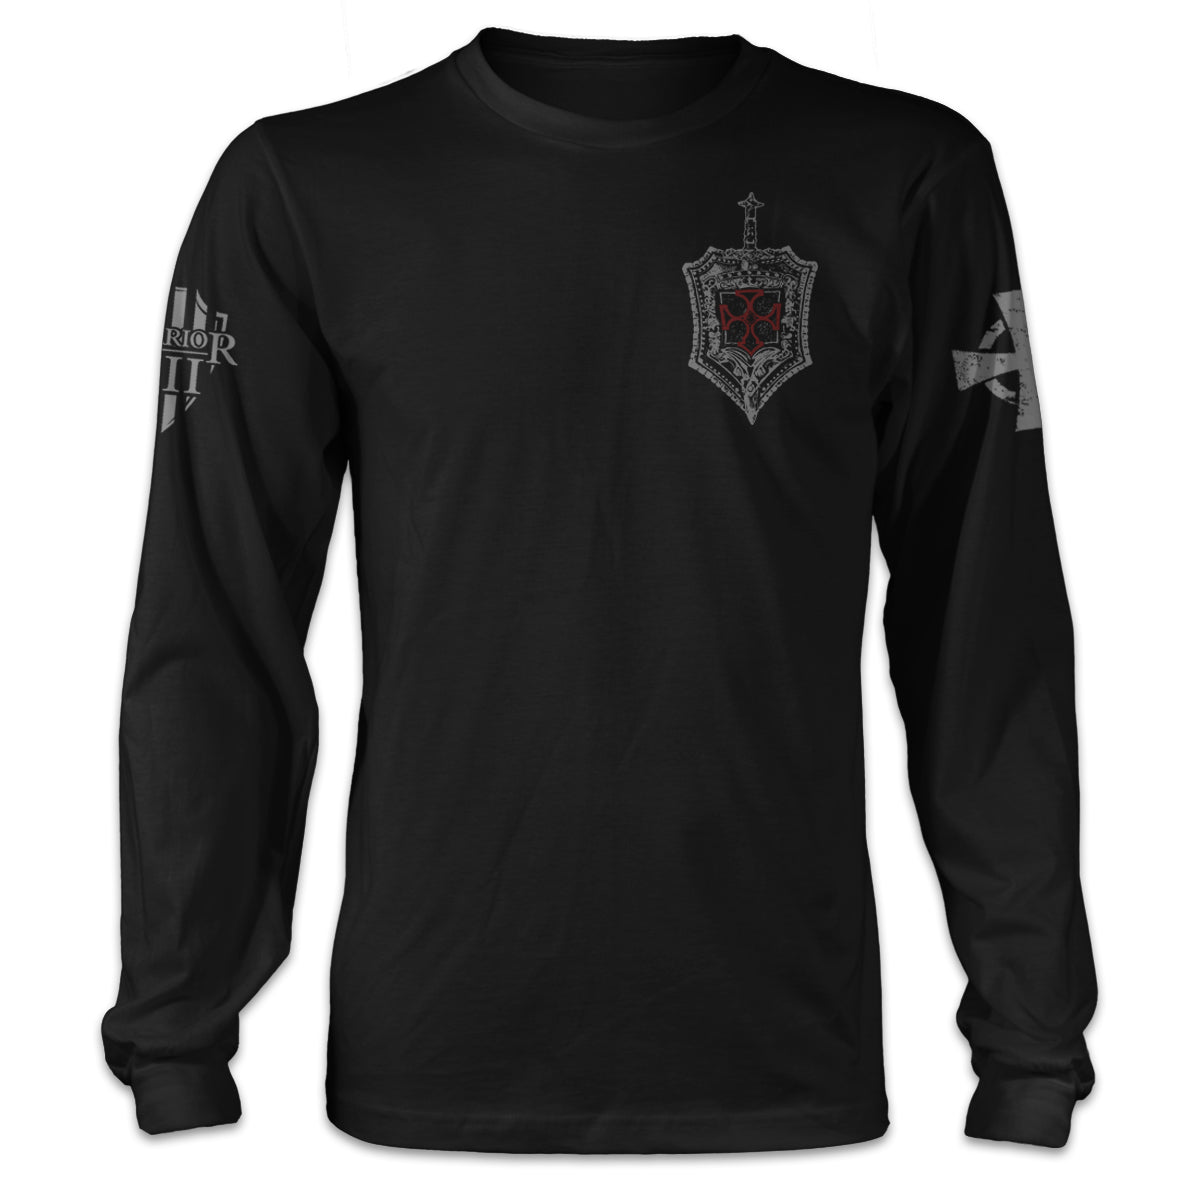 A black long sleeve shirt with the knights templar shield printed on the front.